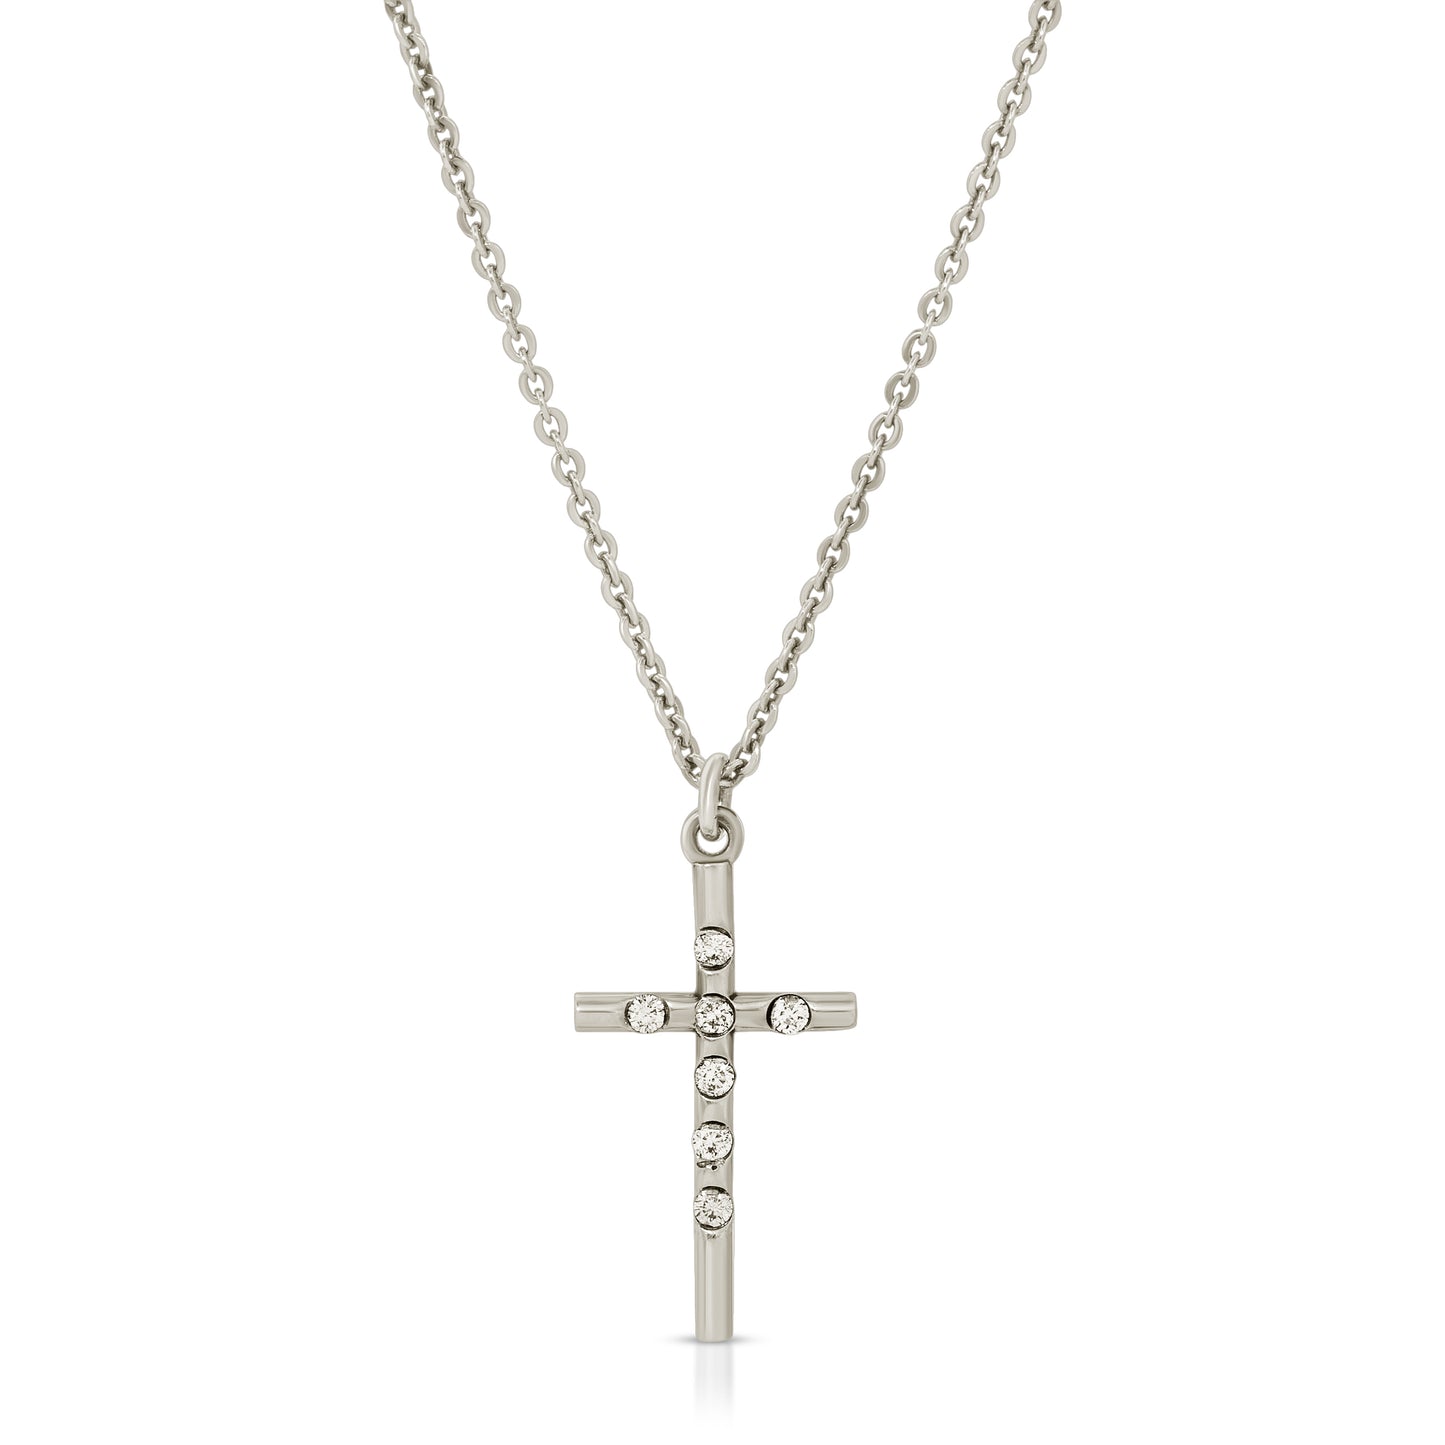 925 Sterling Silver Dainty Cross necklace with 7 diamonds from the wandering jewel